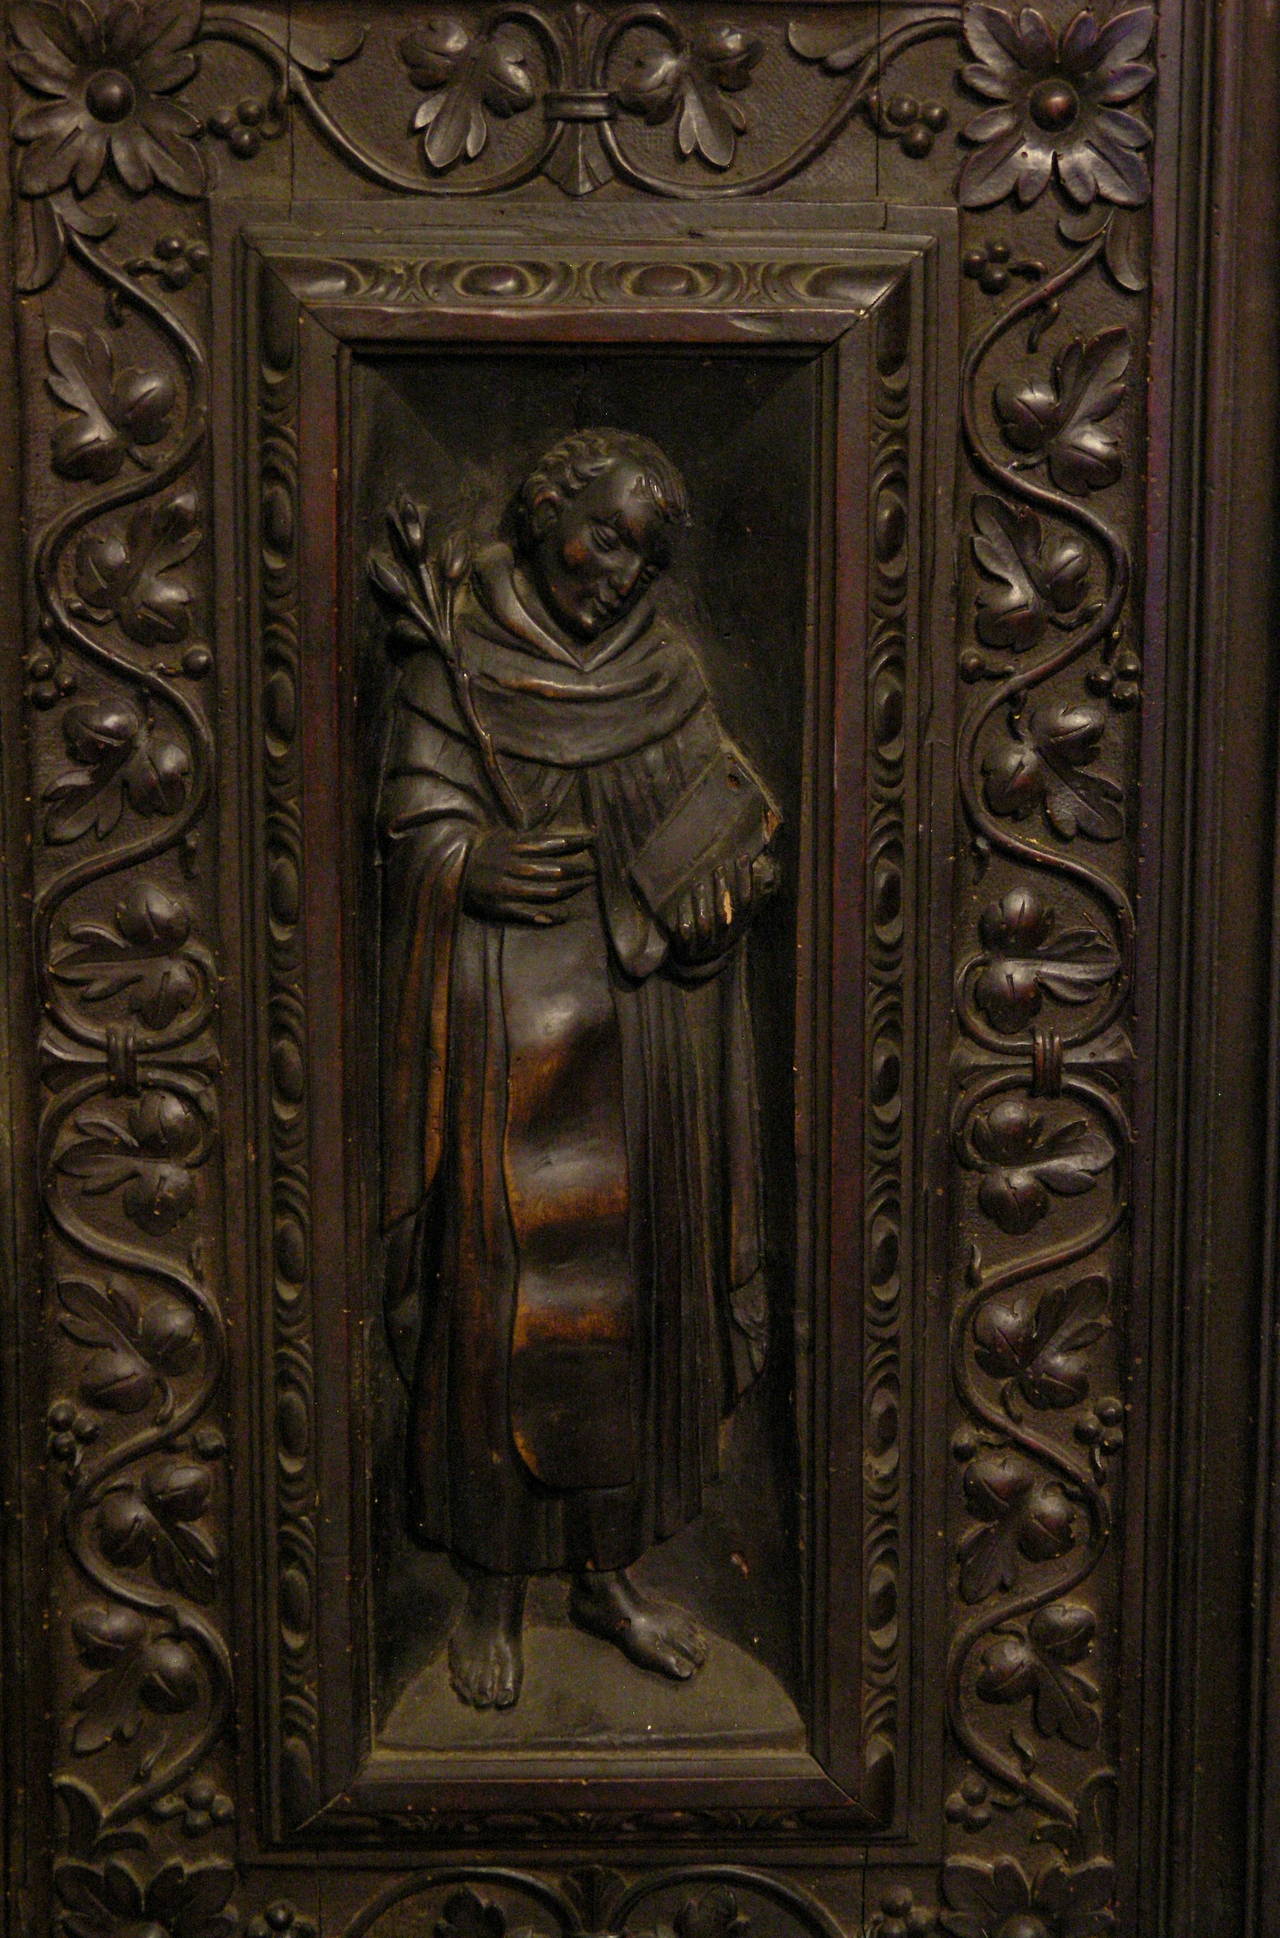 Antique double door made of walnut. 
With saints carved.
Comes from Orvieto, Italy.